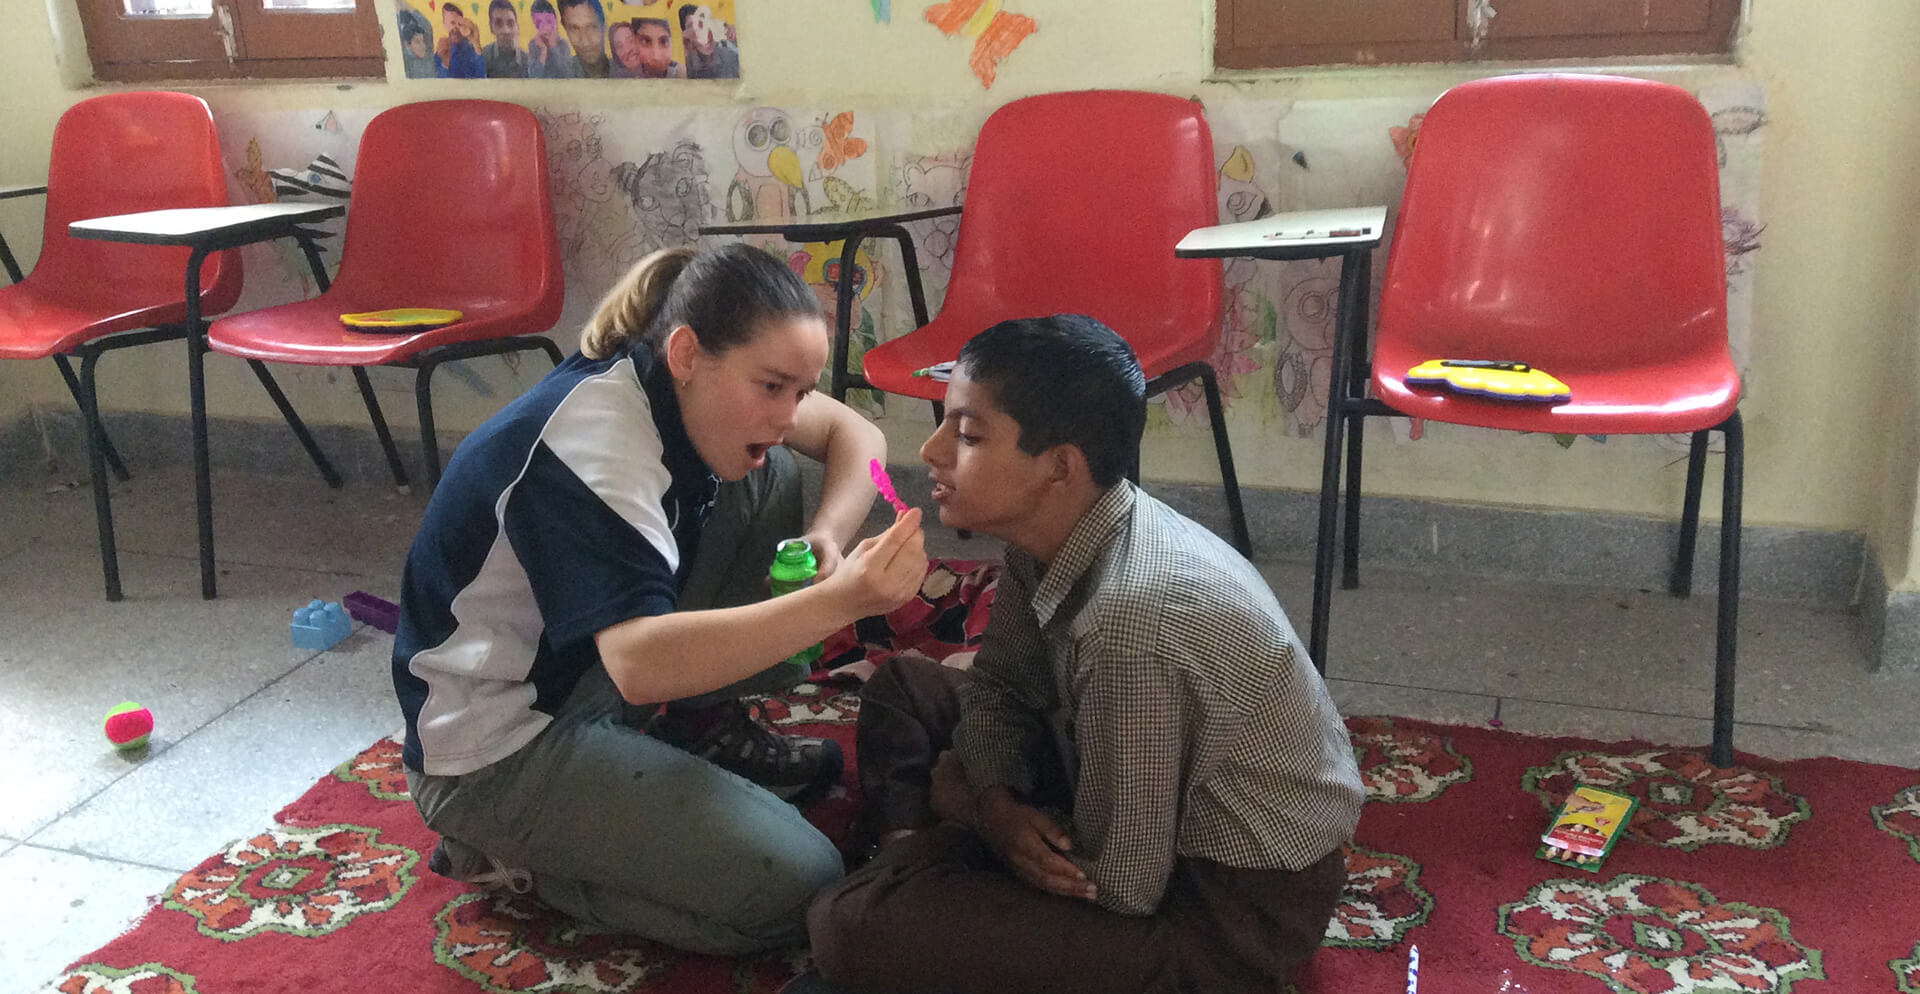 Disabled Care & Special Need Volunteer Abroad